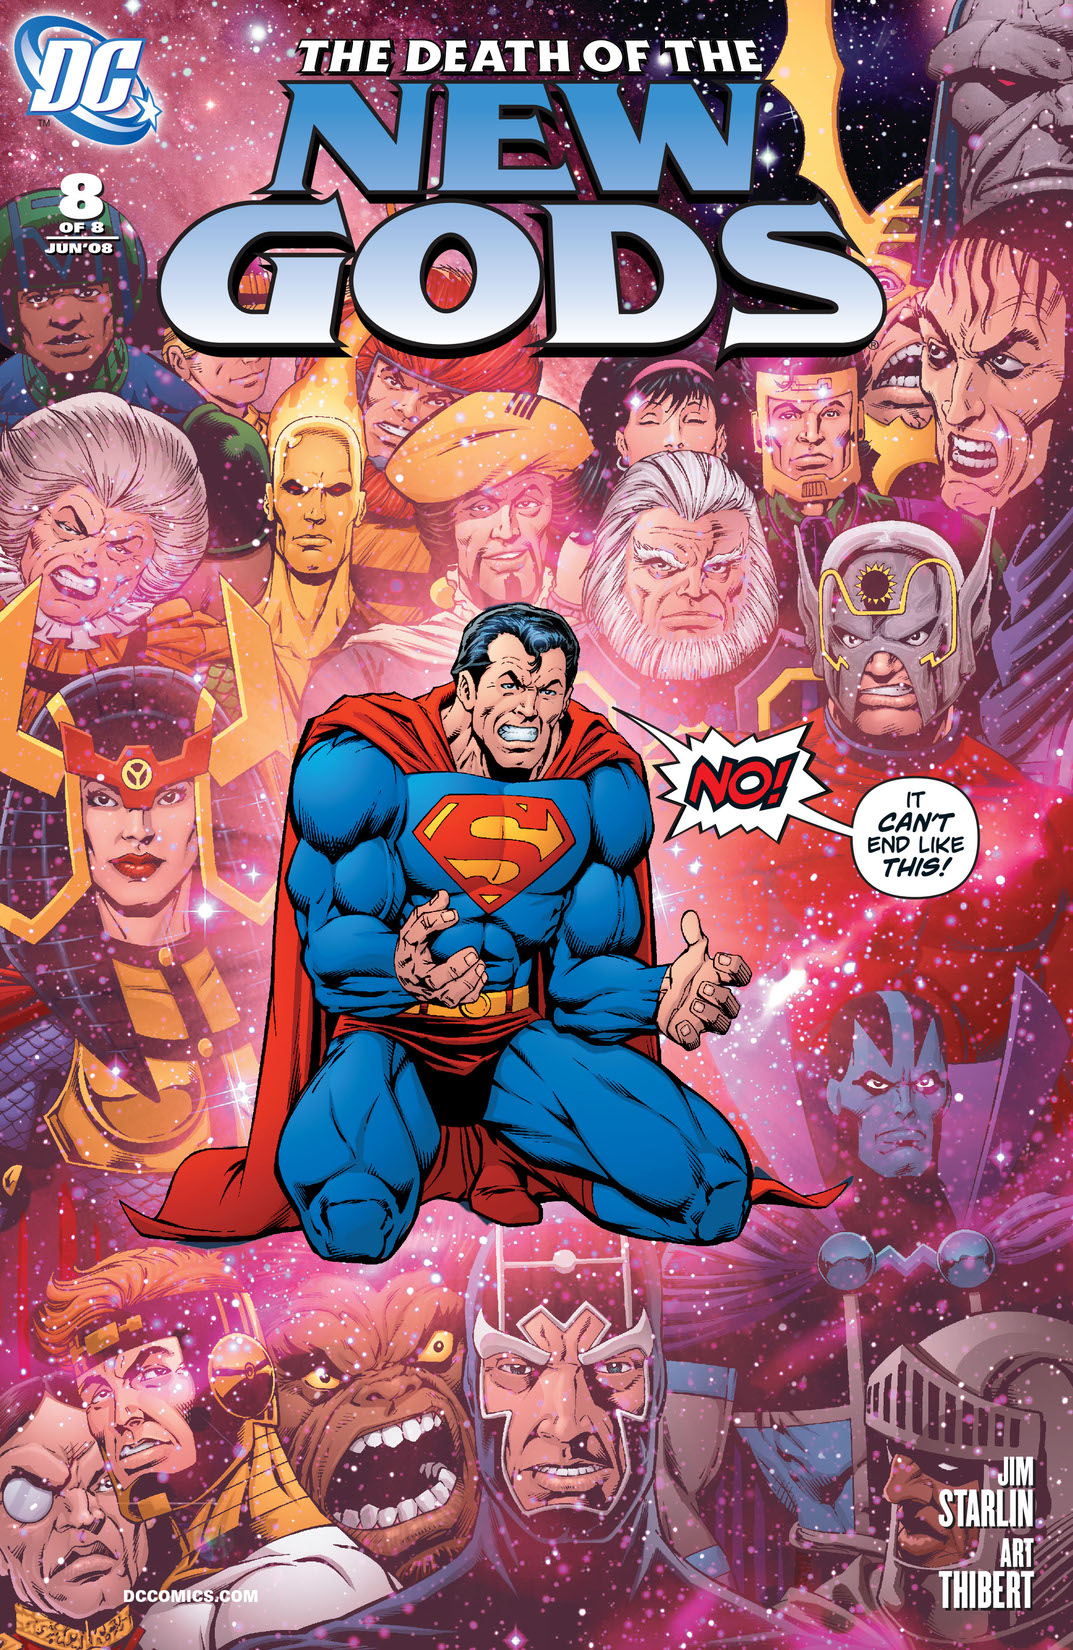 Death of the New Gods #8 preview images